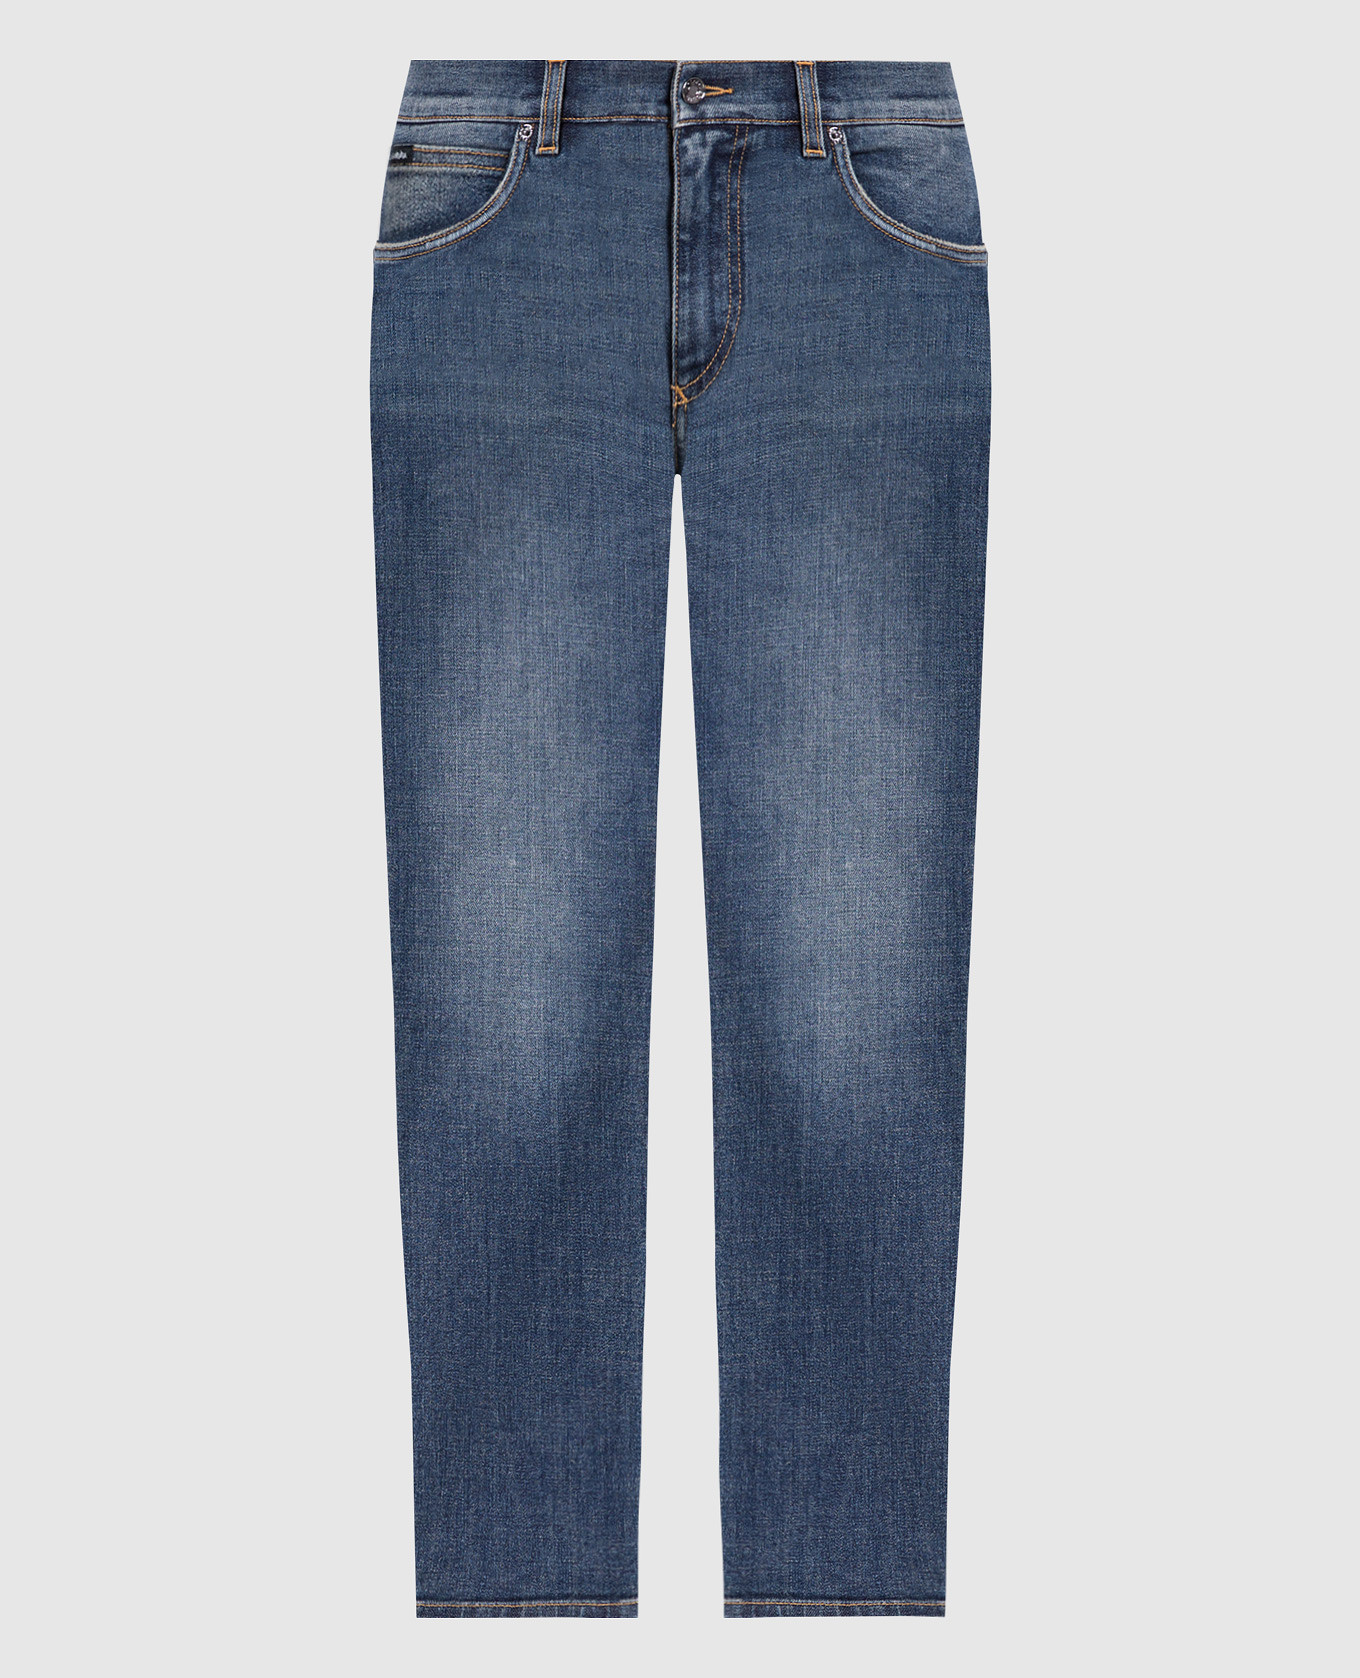 Blue slim jeans with a distressed effect